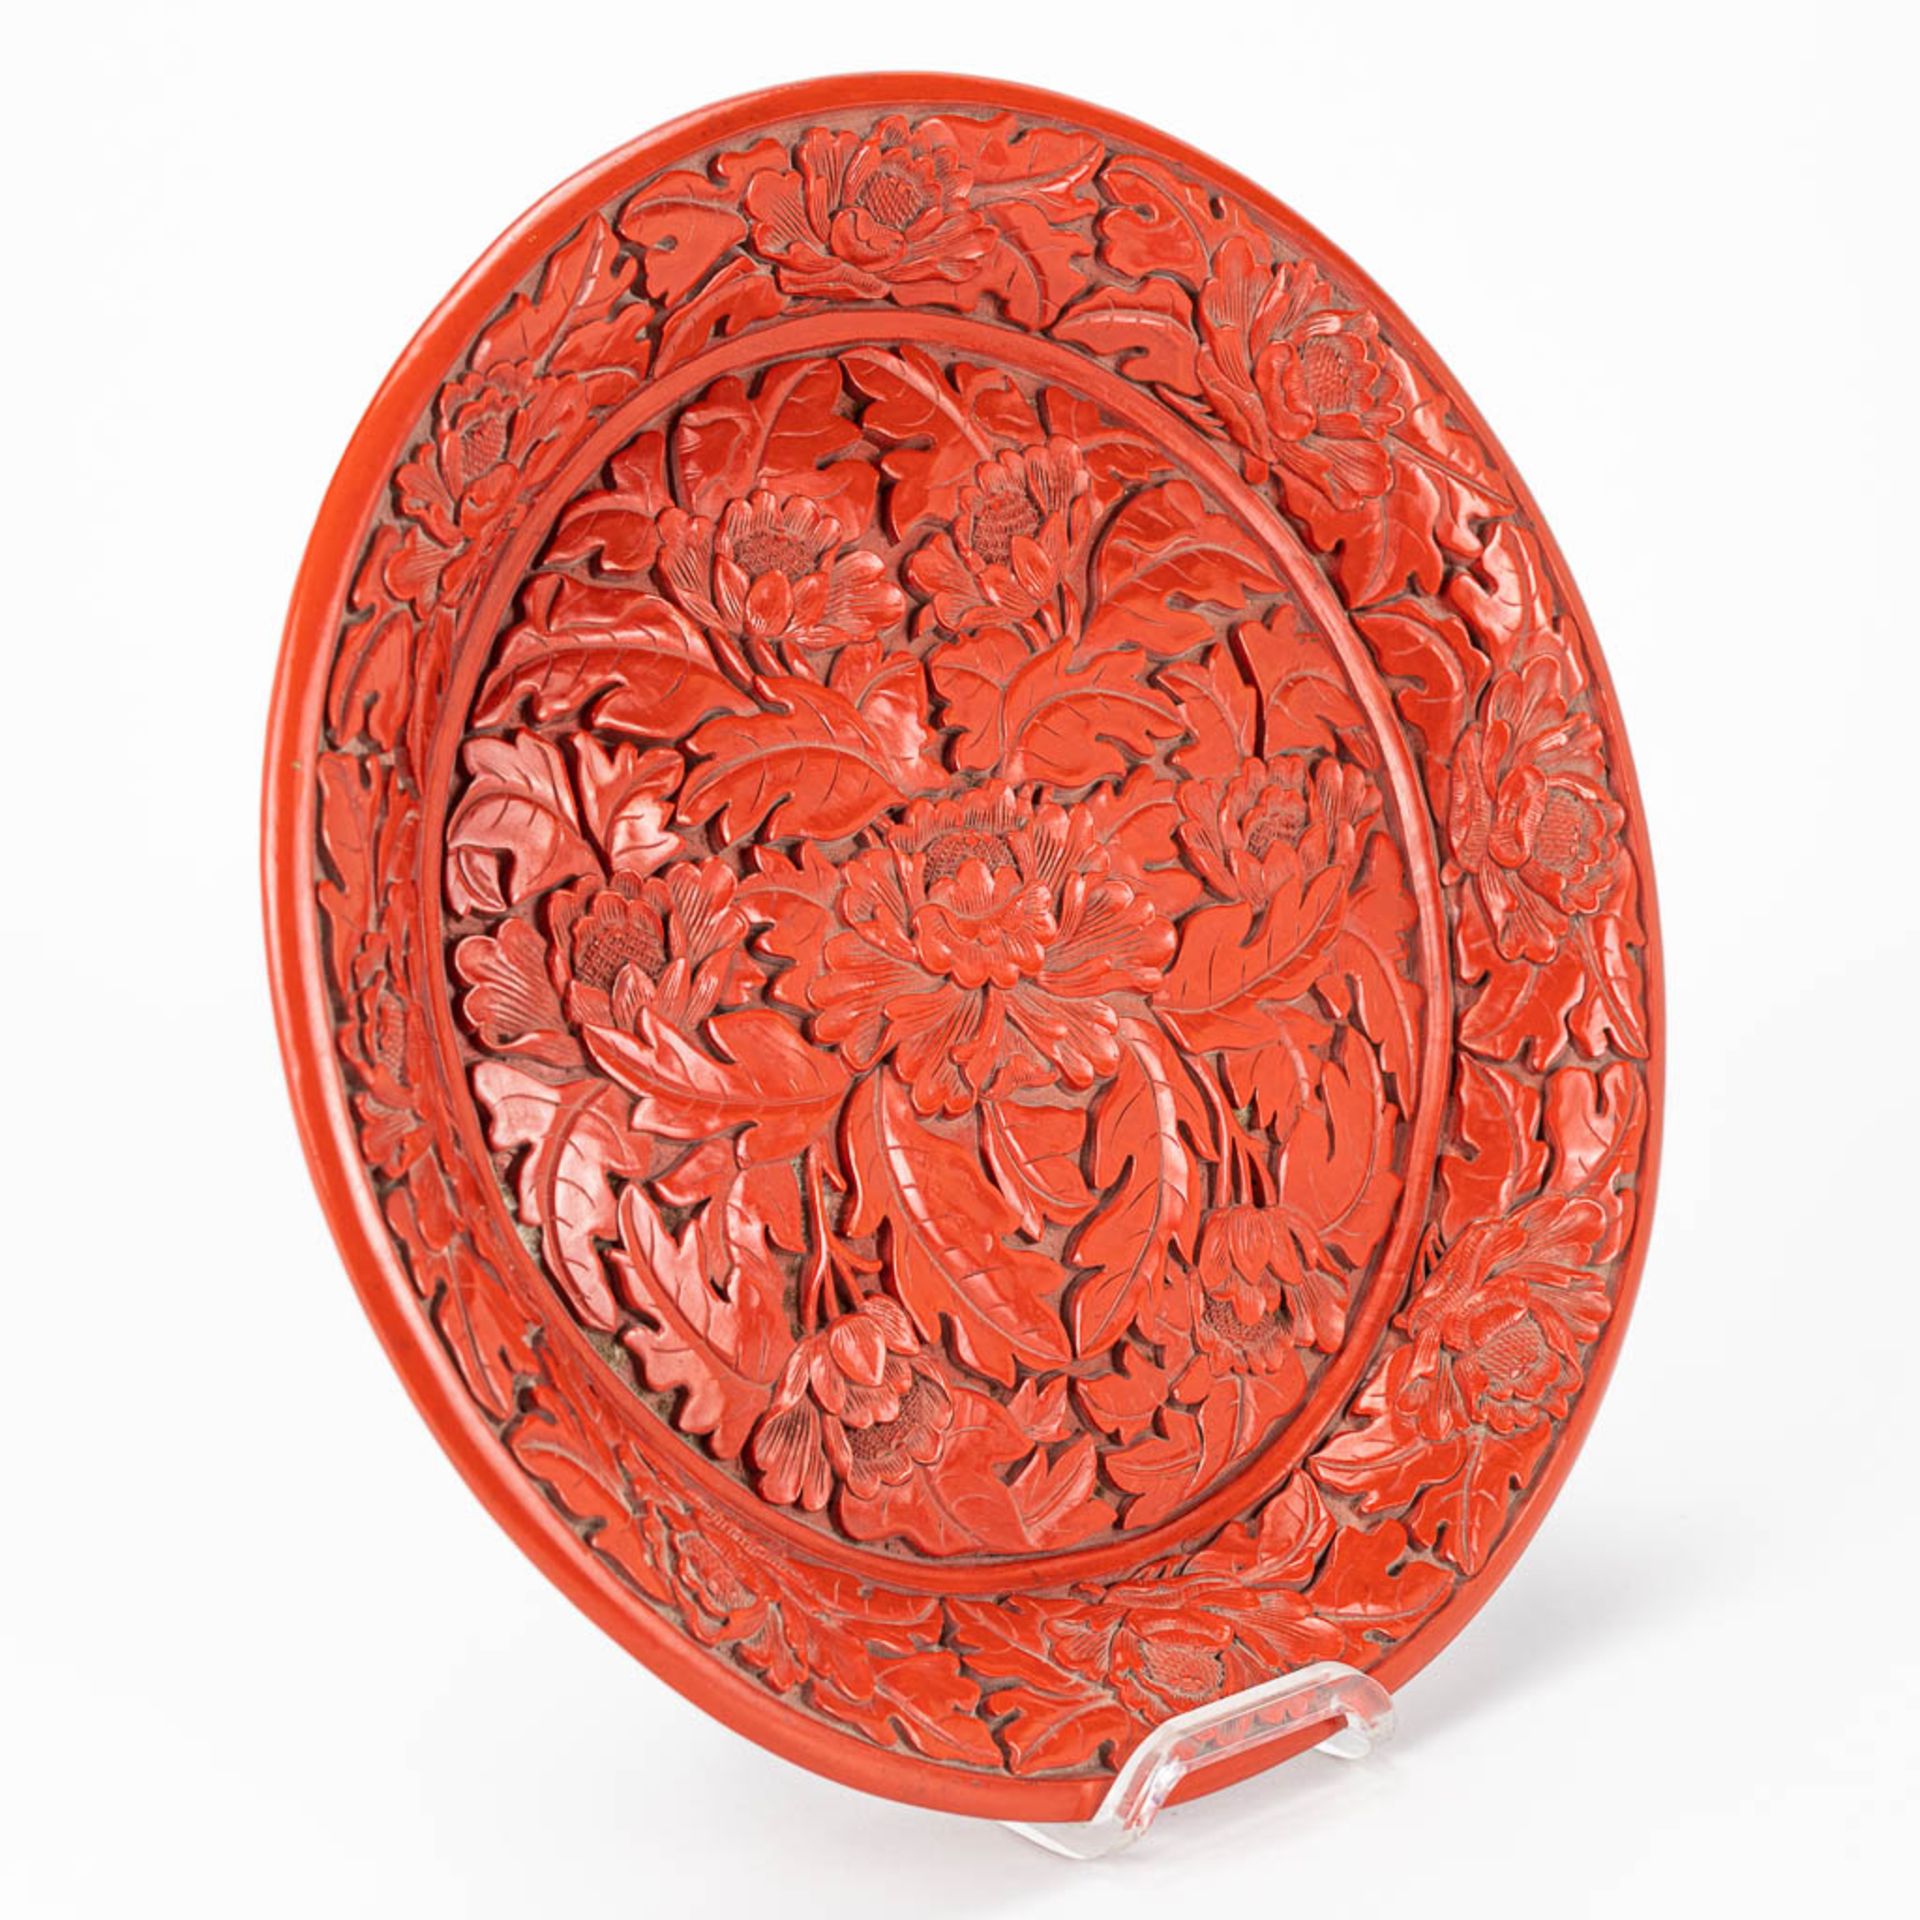 A plate made of lacquered cinnabar and made in China. - Image 7 of 10